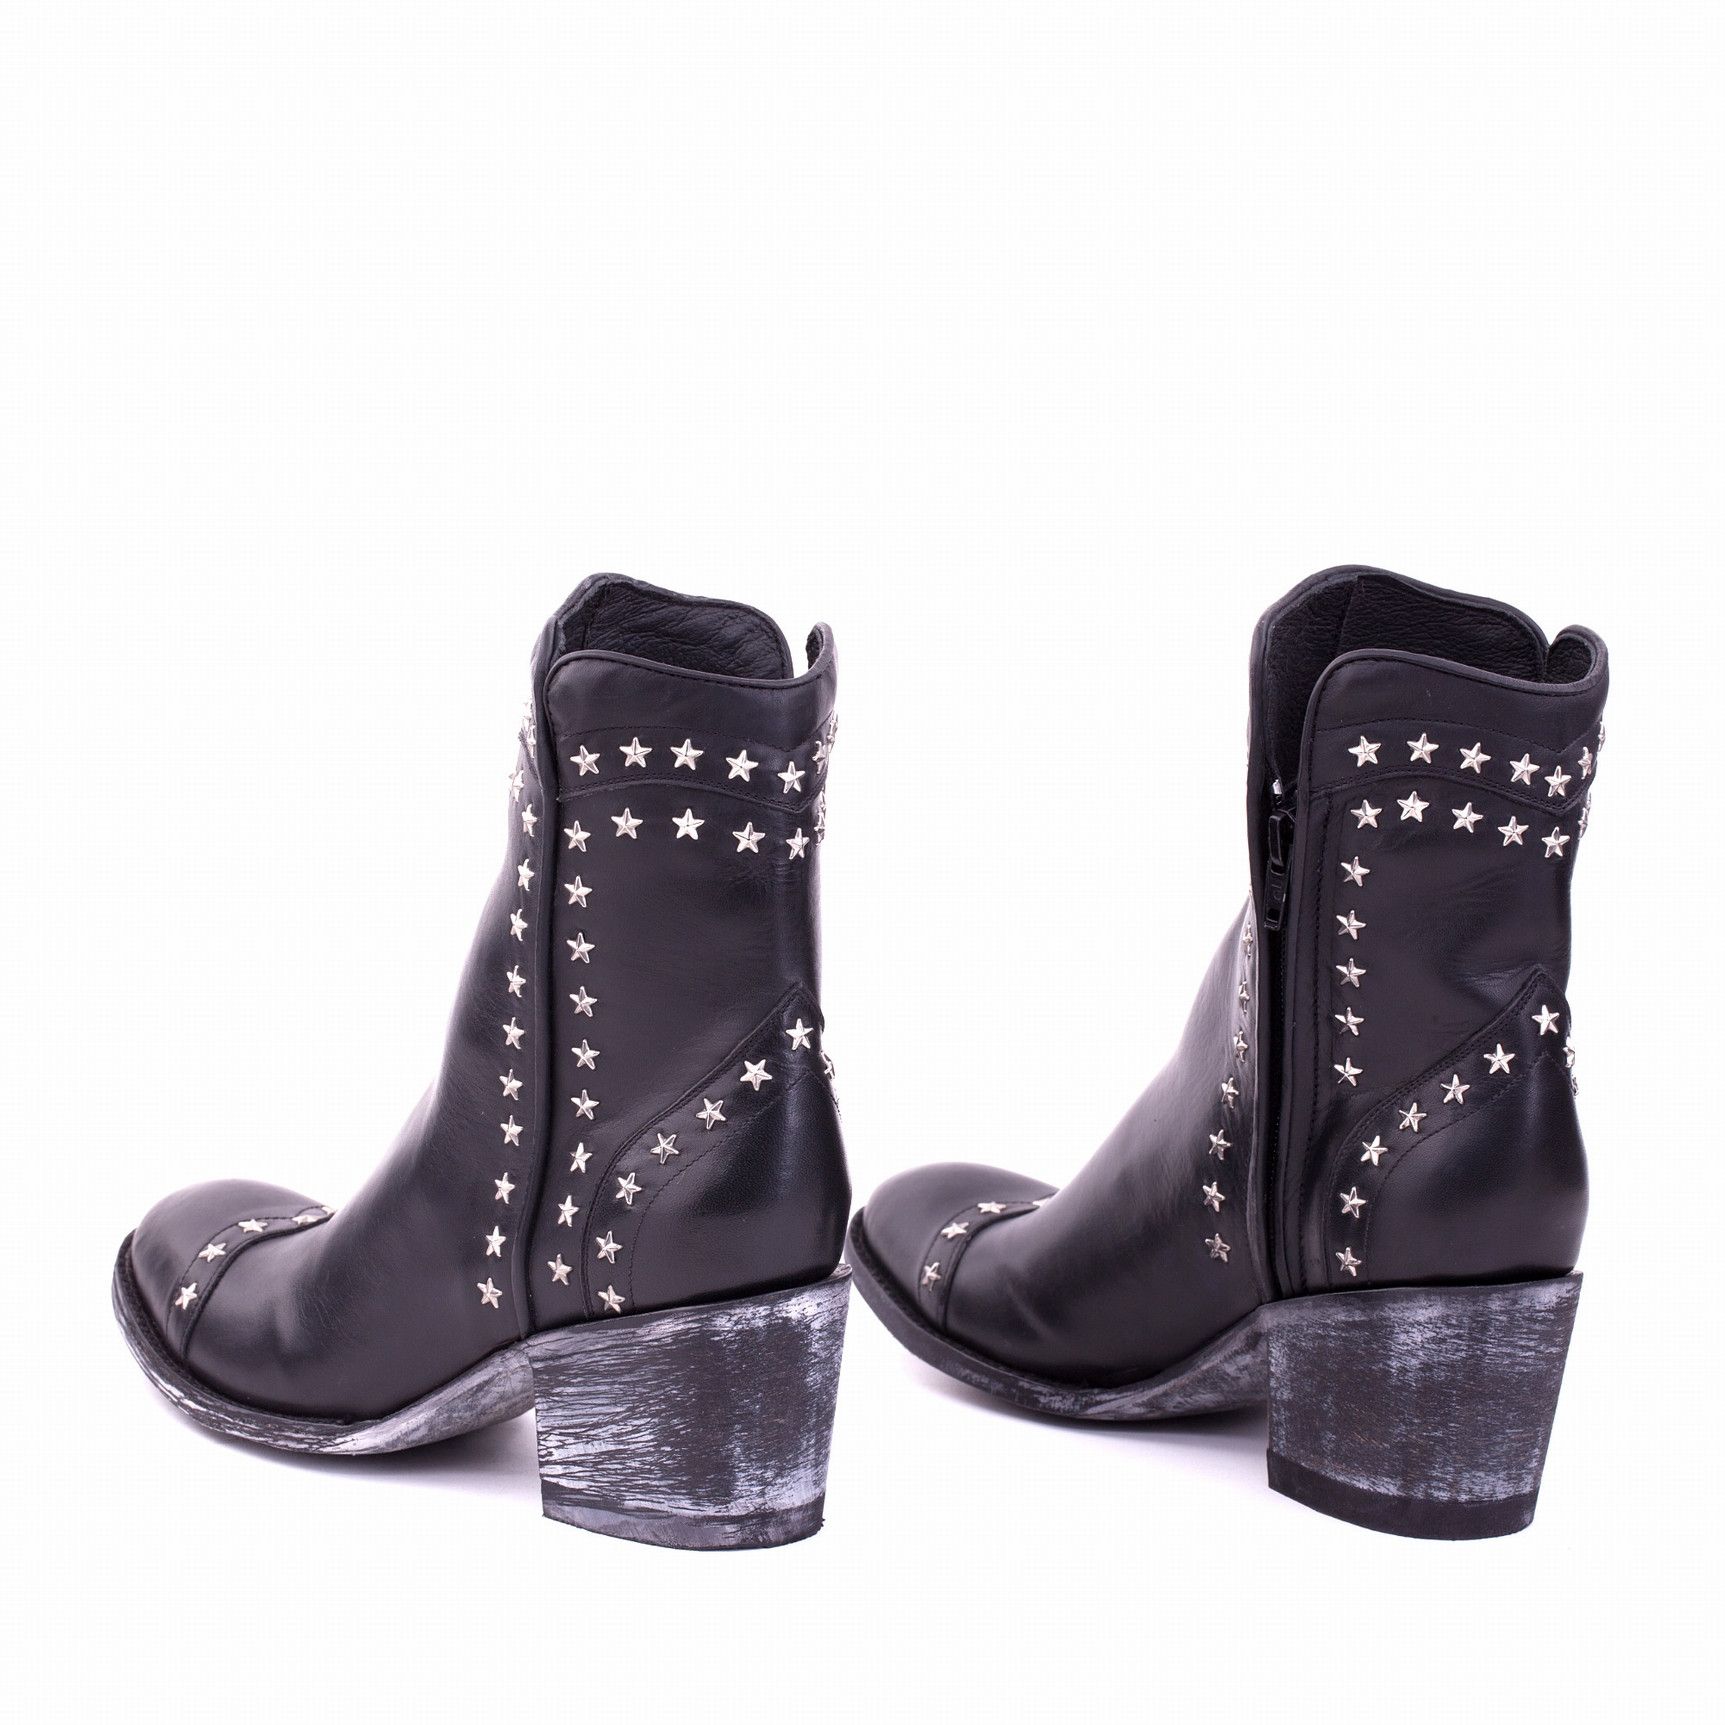 CRITHIER STAR BLACK RANCHERO ROUNDED ANKLE BOOTS WITH STUDS AND  SIDE ZIP CLOSURE  Total heel height 2.6 Inches  100% cow leathe